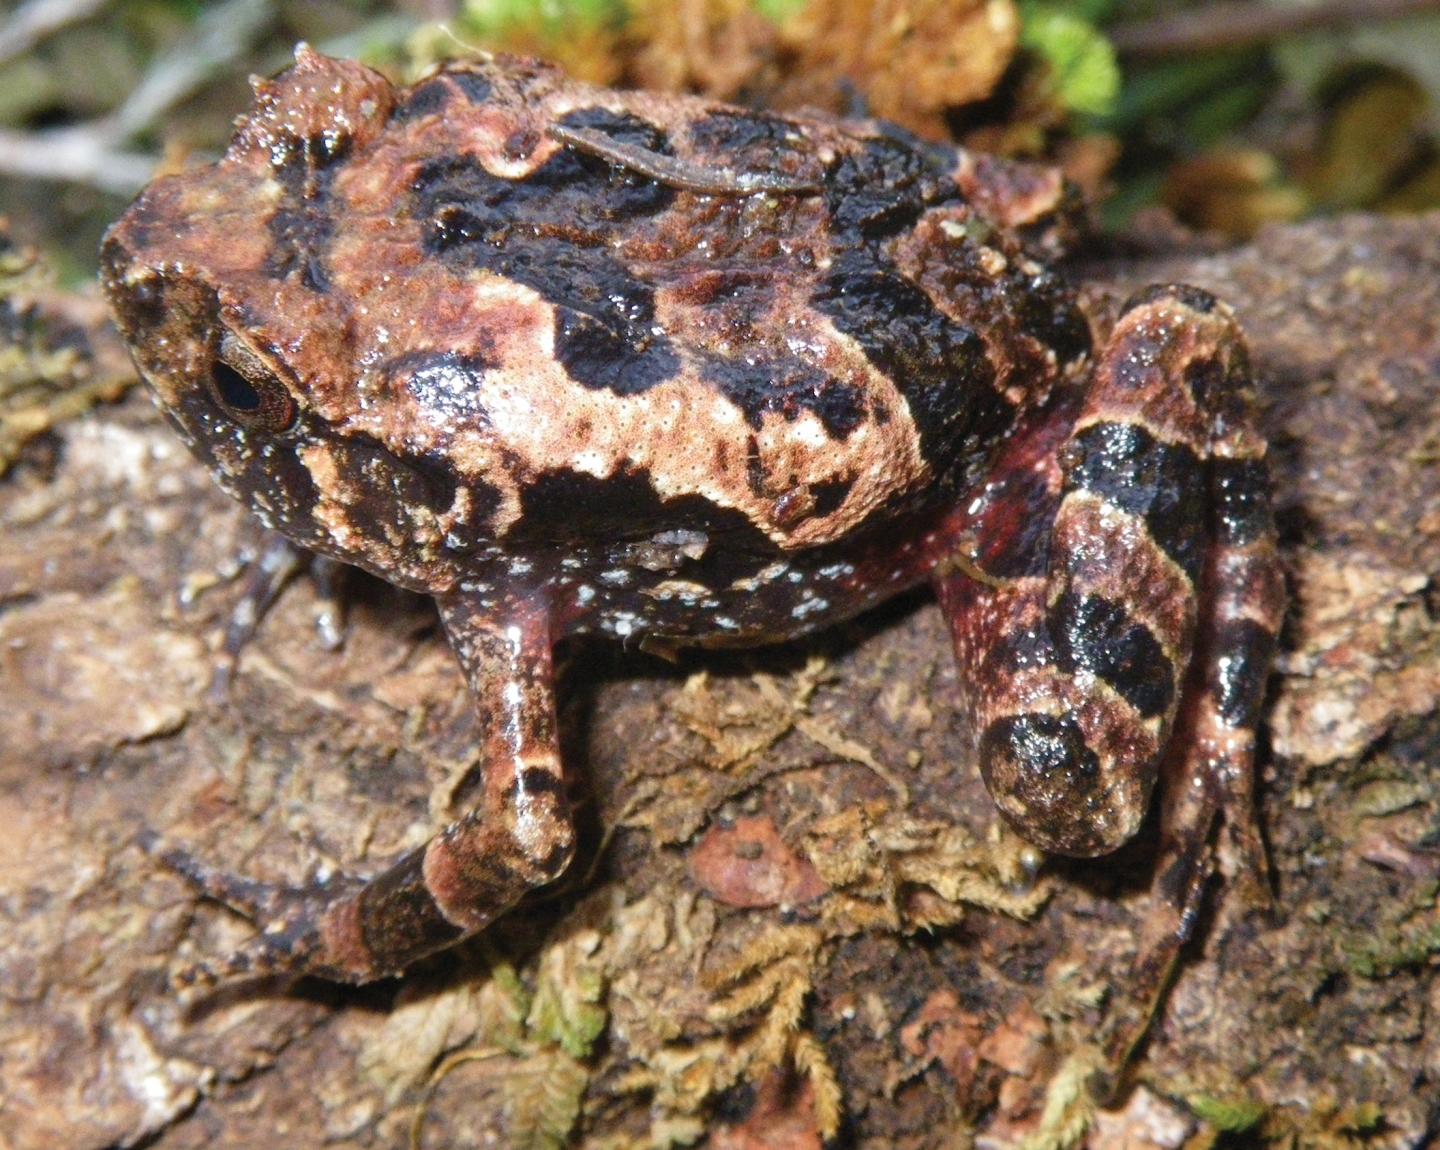 Two New Species of Frogs Discovered in Madagascar